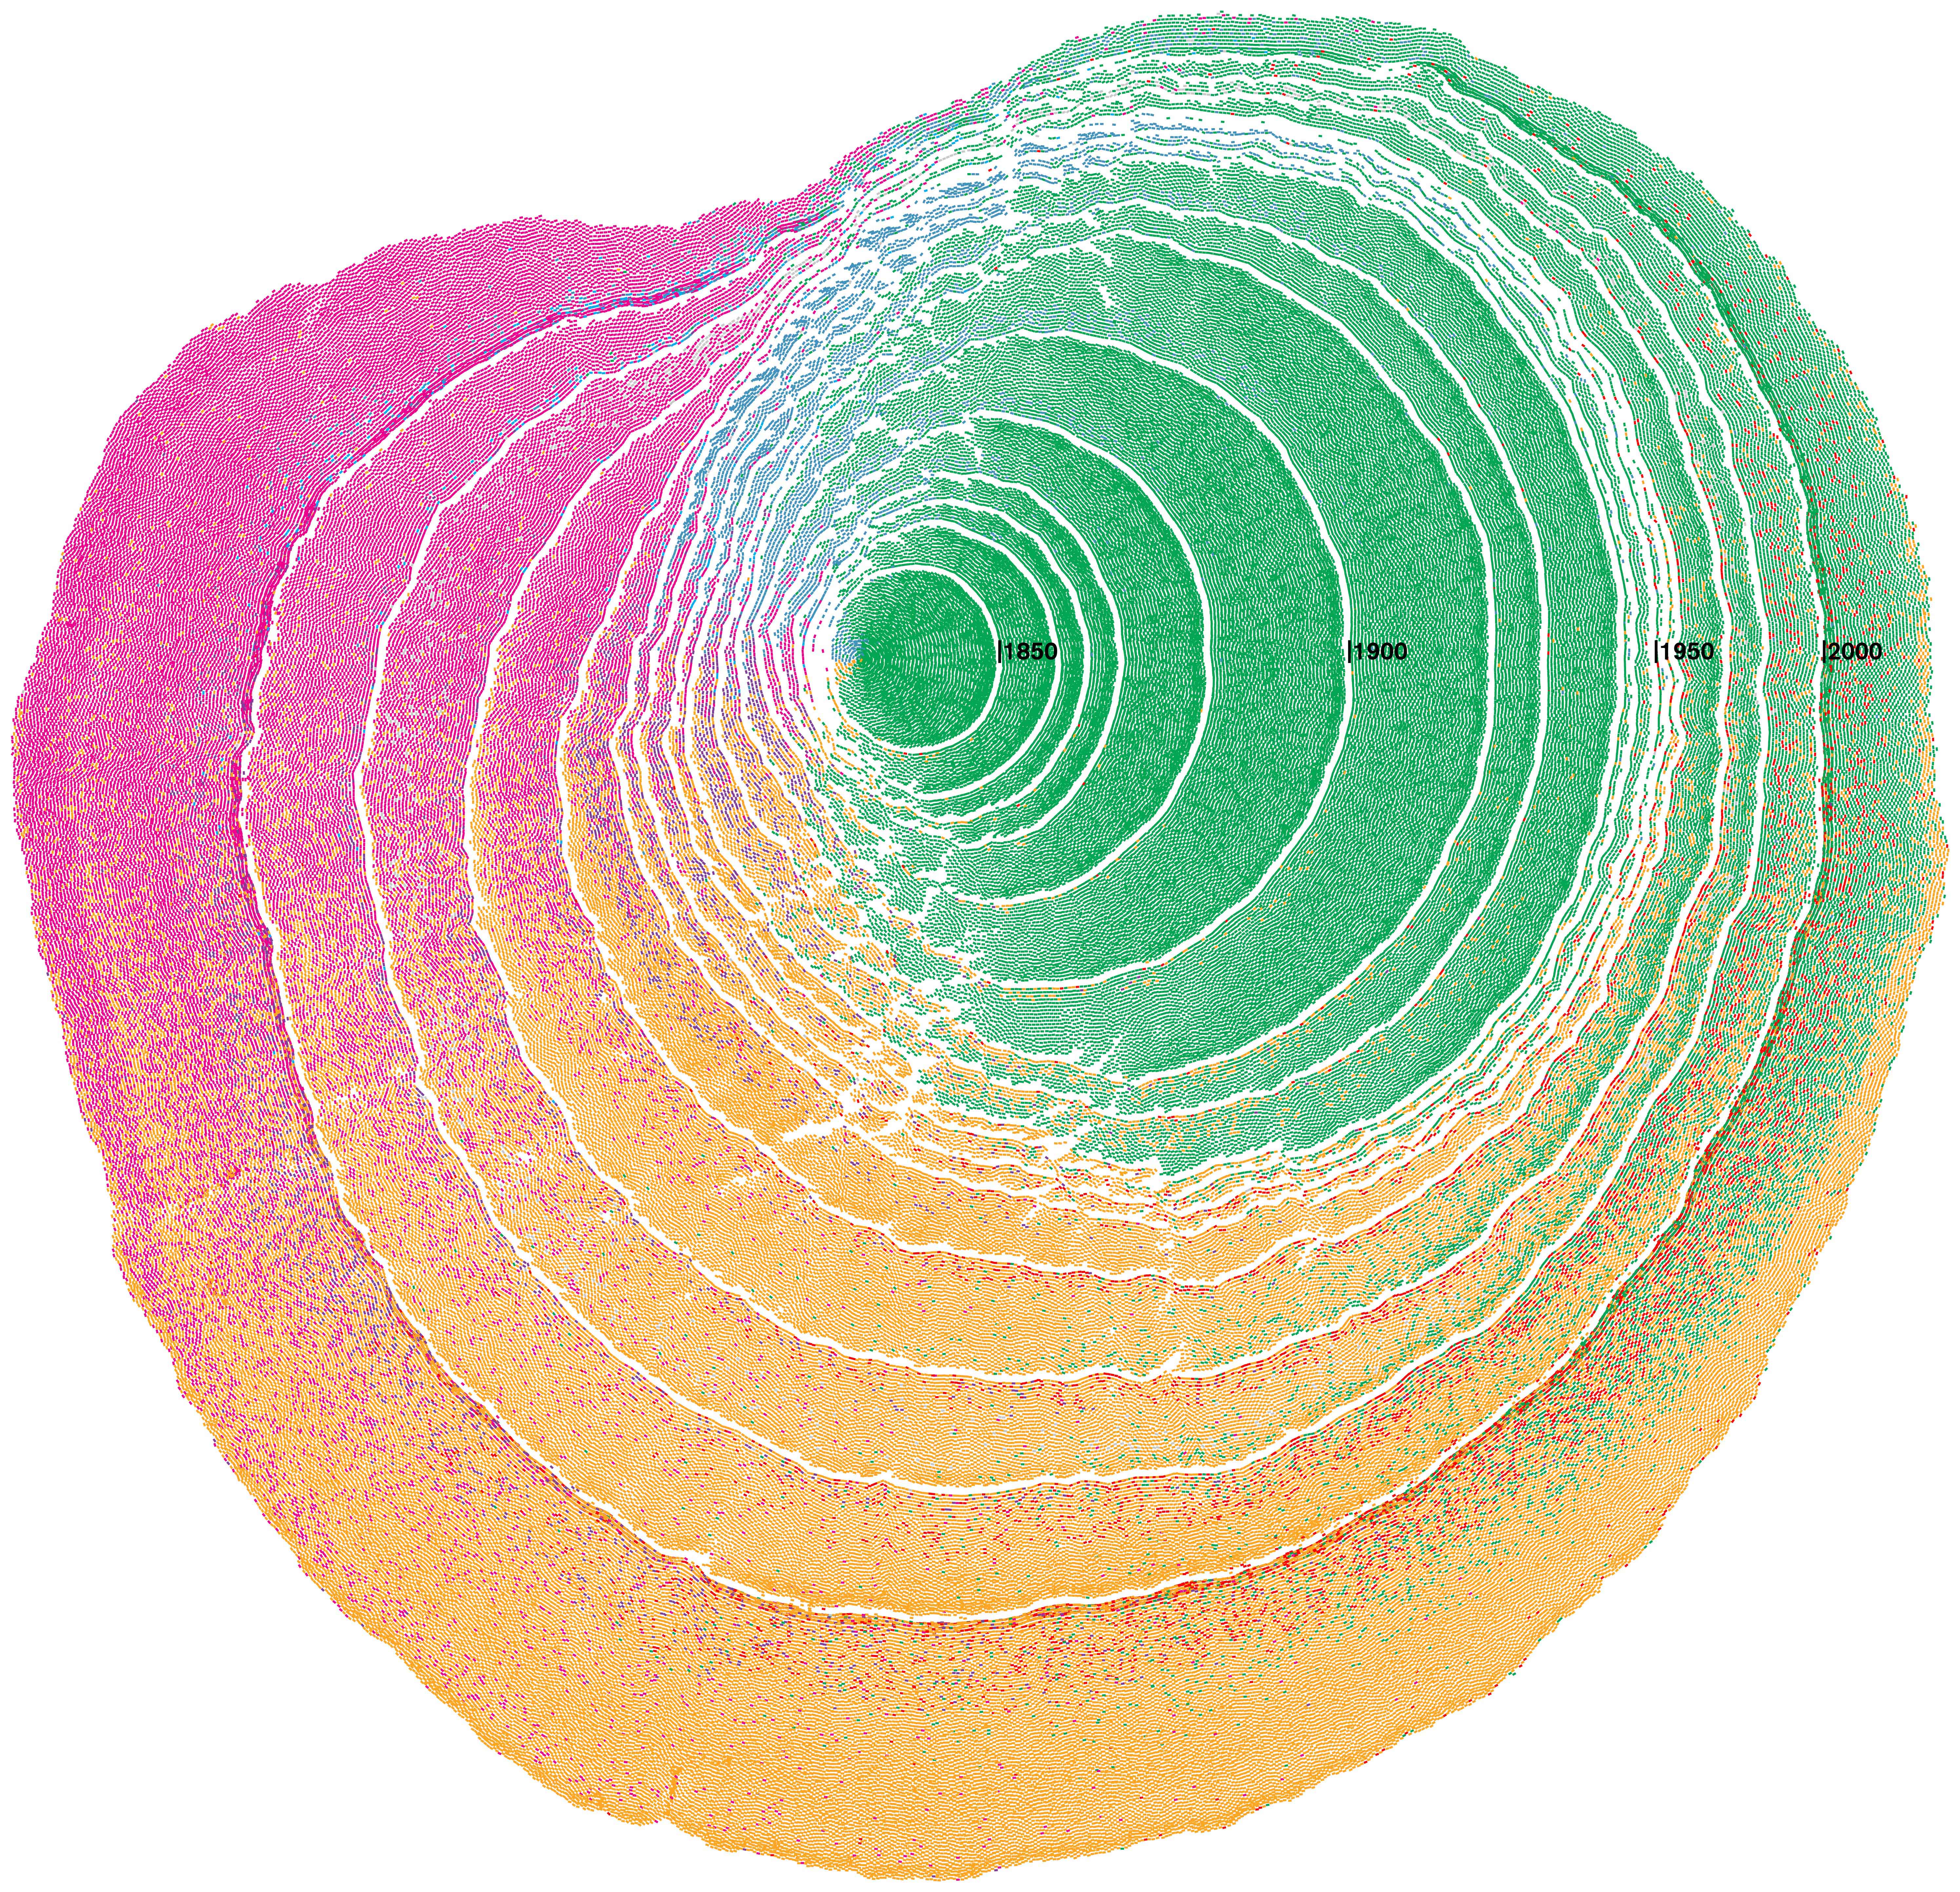 Immigration patterns to the United States visualized as tree rings.